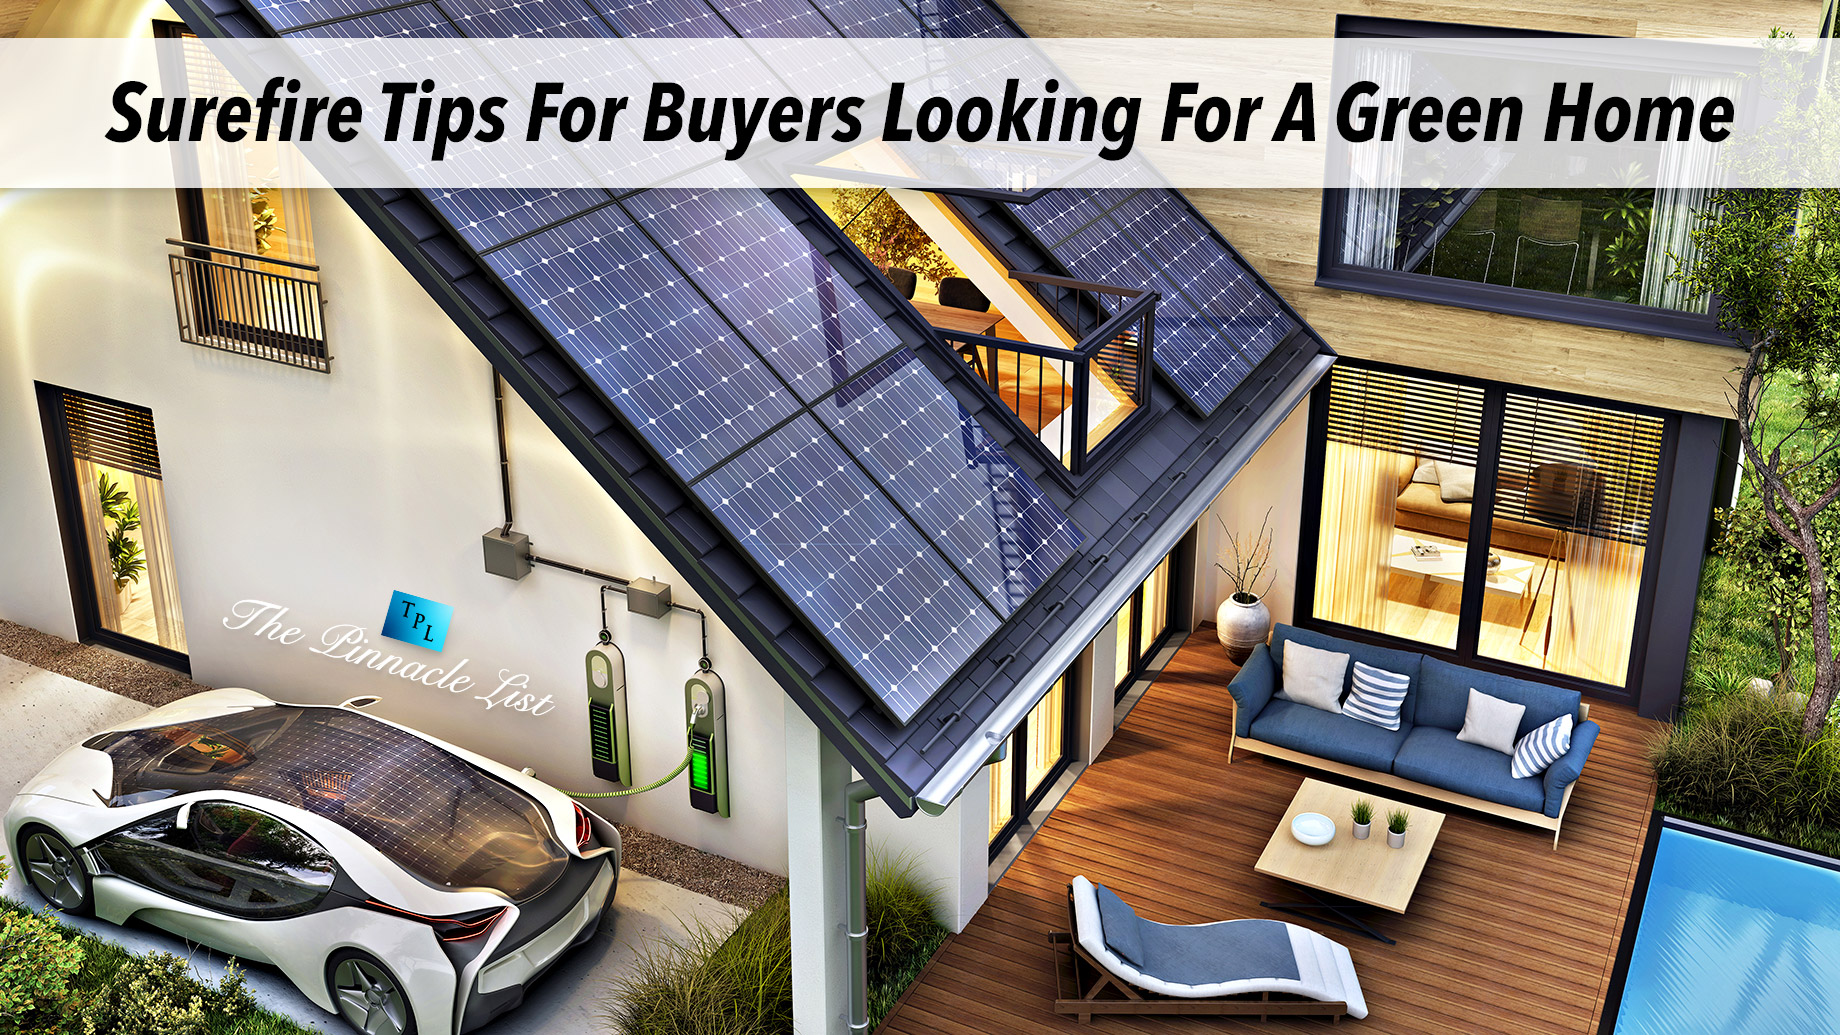 Surefire Tips For Buyers Looking For A Green Home